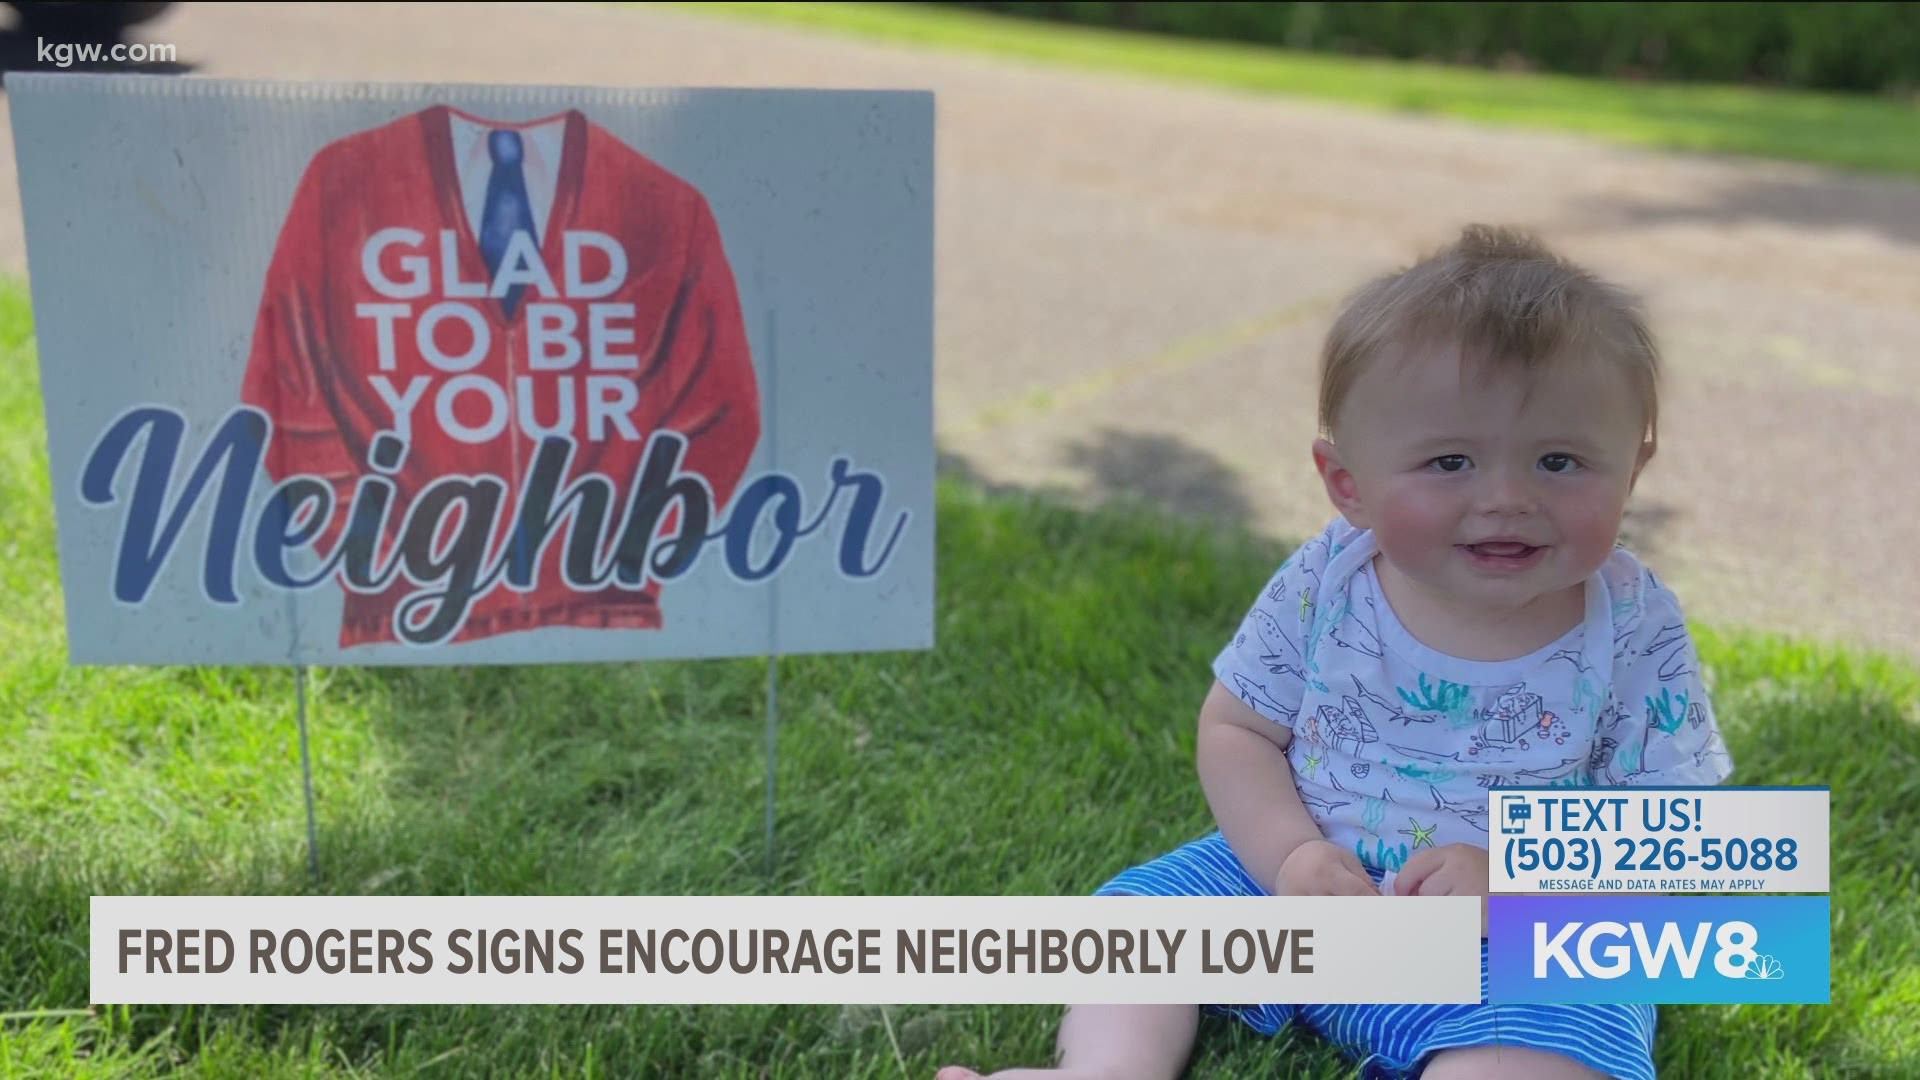 Just before the pandemic hit, Joe Manning and Sofie Ruse decided to design and print yard signs inspired by America's favorite neighbor, Mr. Rogers.